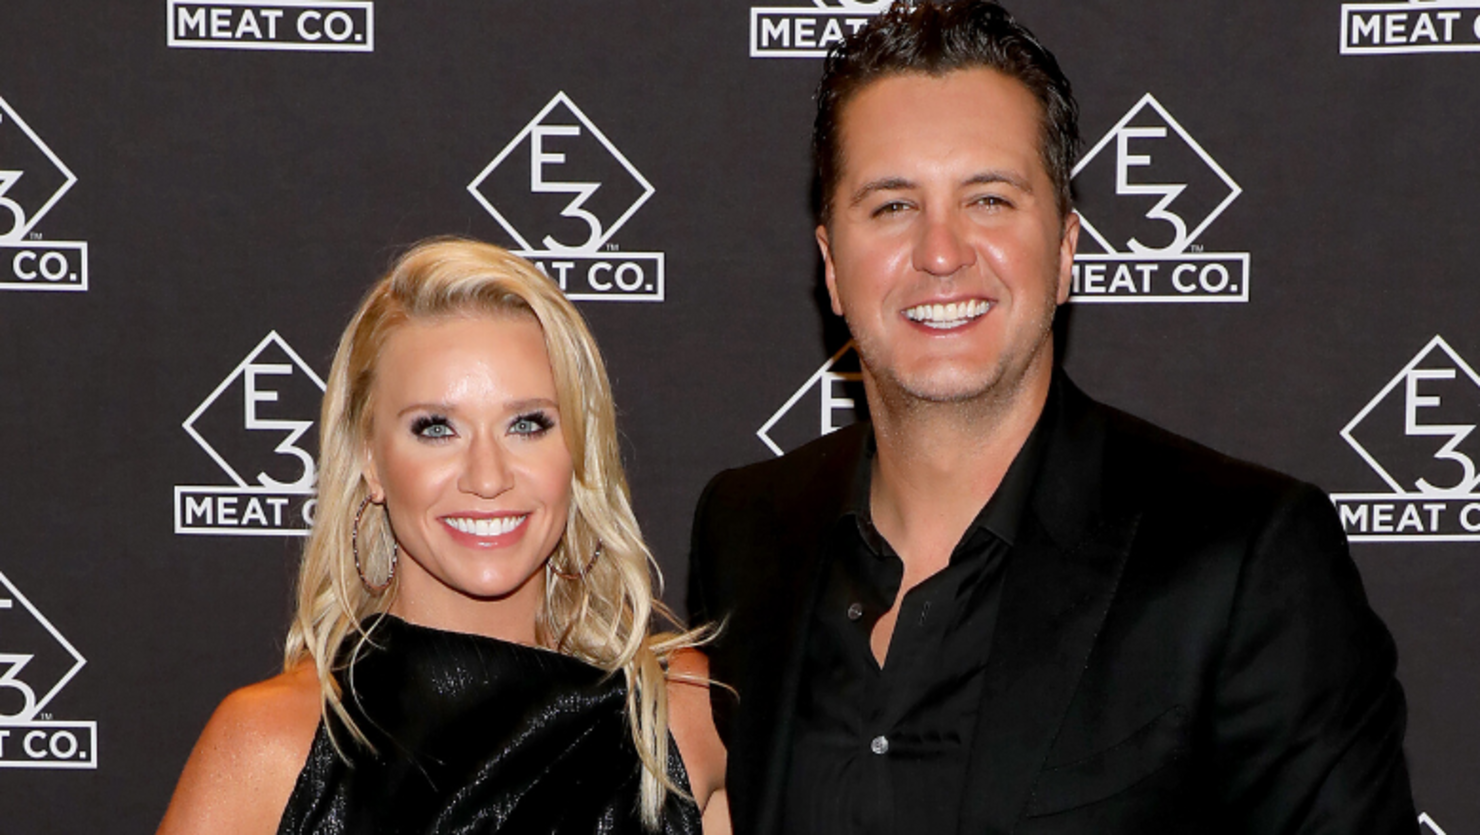 Luke Bryan Left Hilariously Clever Comment On His Wife Caroline's Instagram